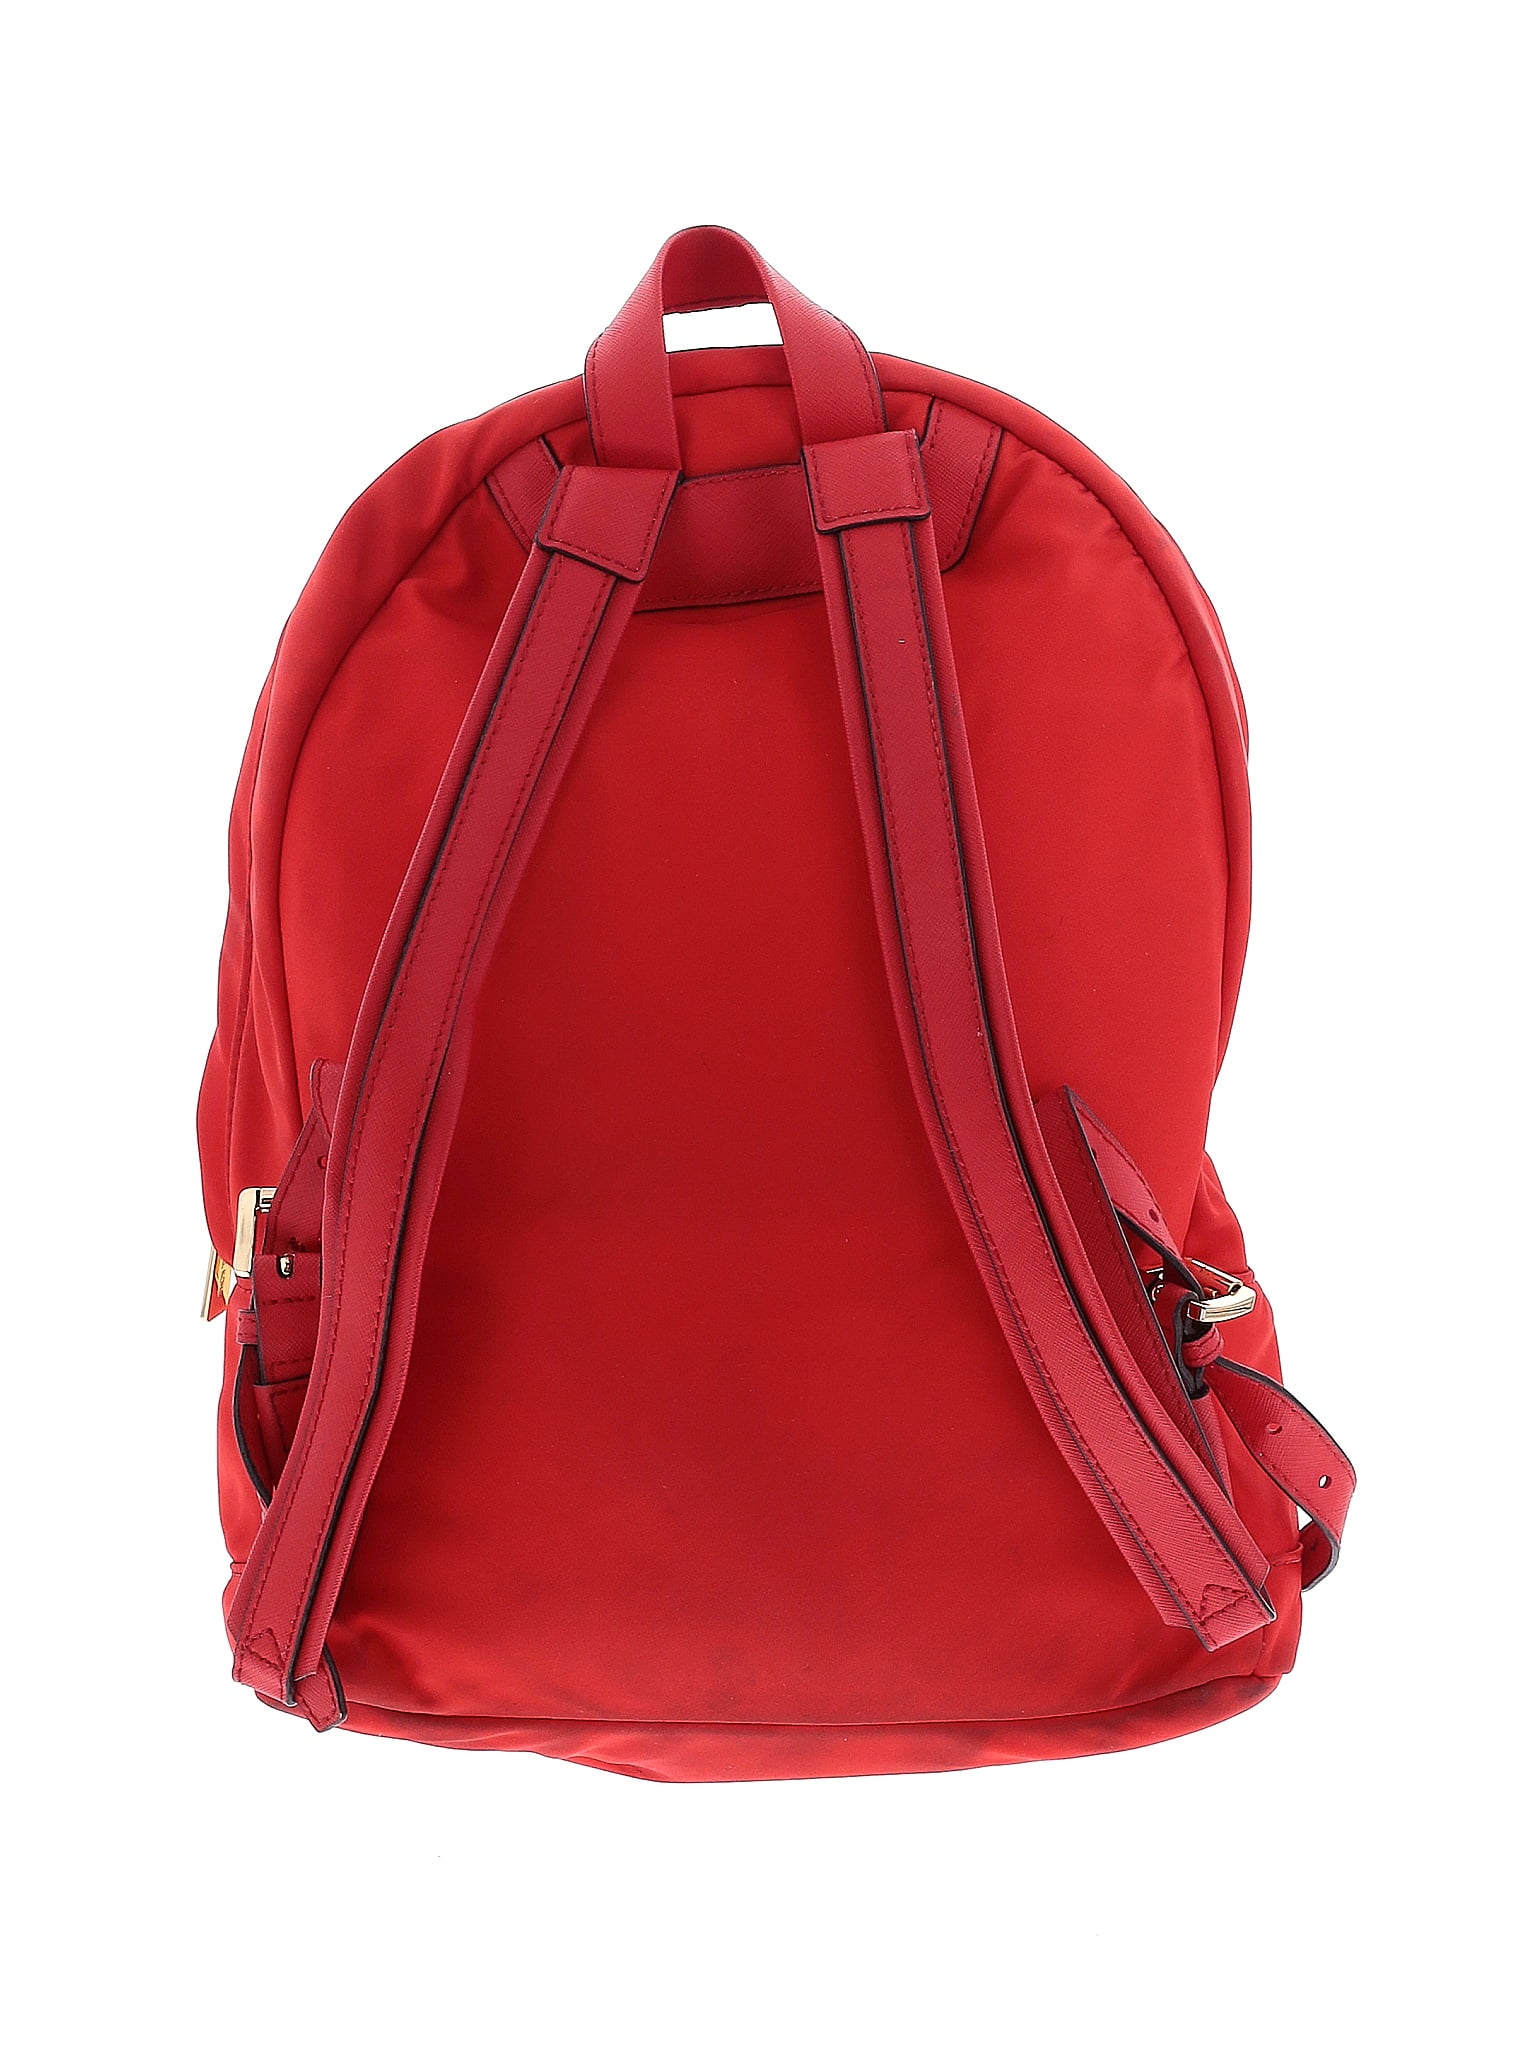 MICHAEL Michael Kors Backpacks On Sale Up To 90% Off Retail